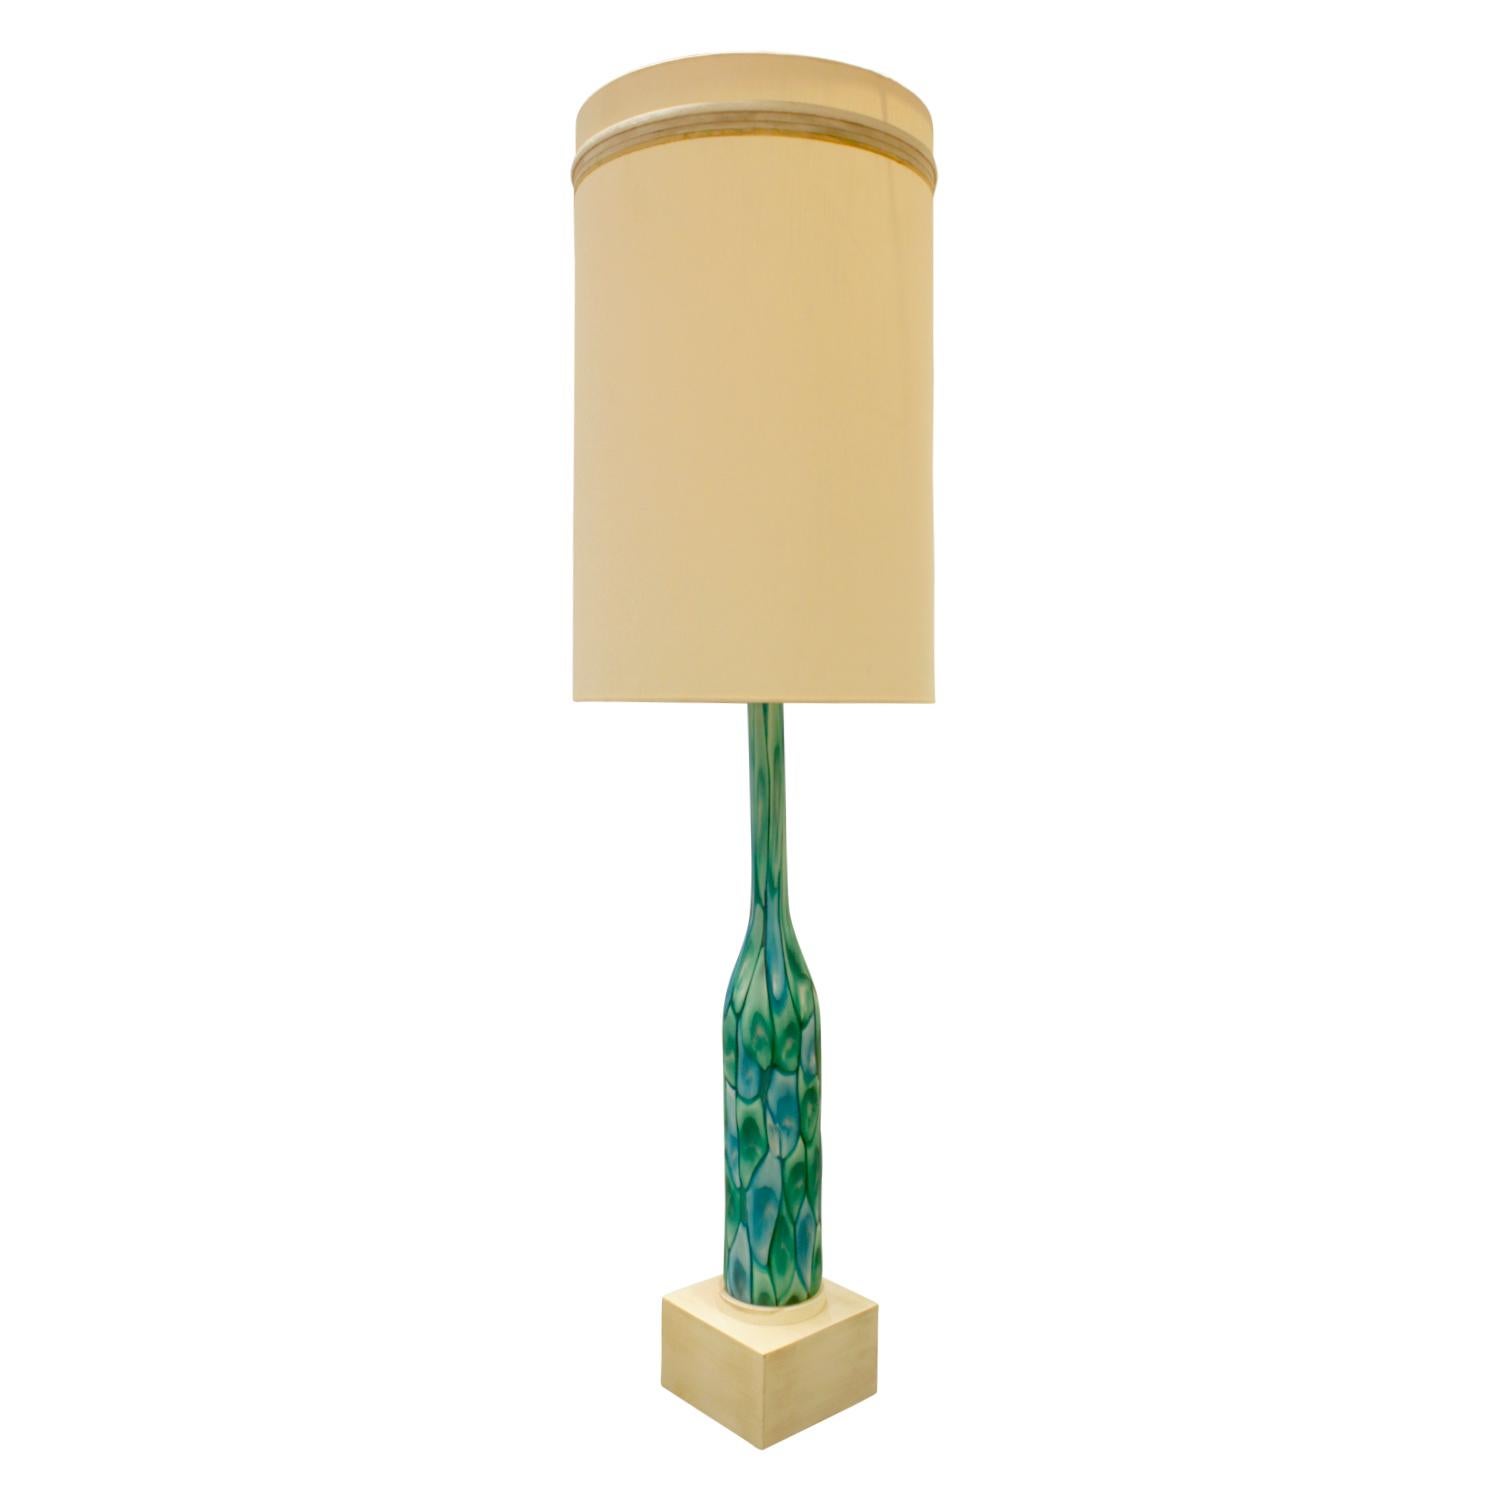 Large hand-blown table lamp with green and blue murrhines with lacquered base and original custom shade by Ermanno Toso for Fratelli Toso, Murano Italy, 1959.  The colors in this lamp are extraordinary.

Reference:
Venetian Glass 1890-1990 by Rosa